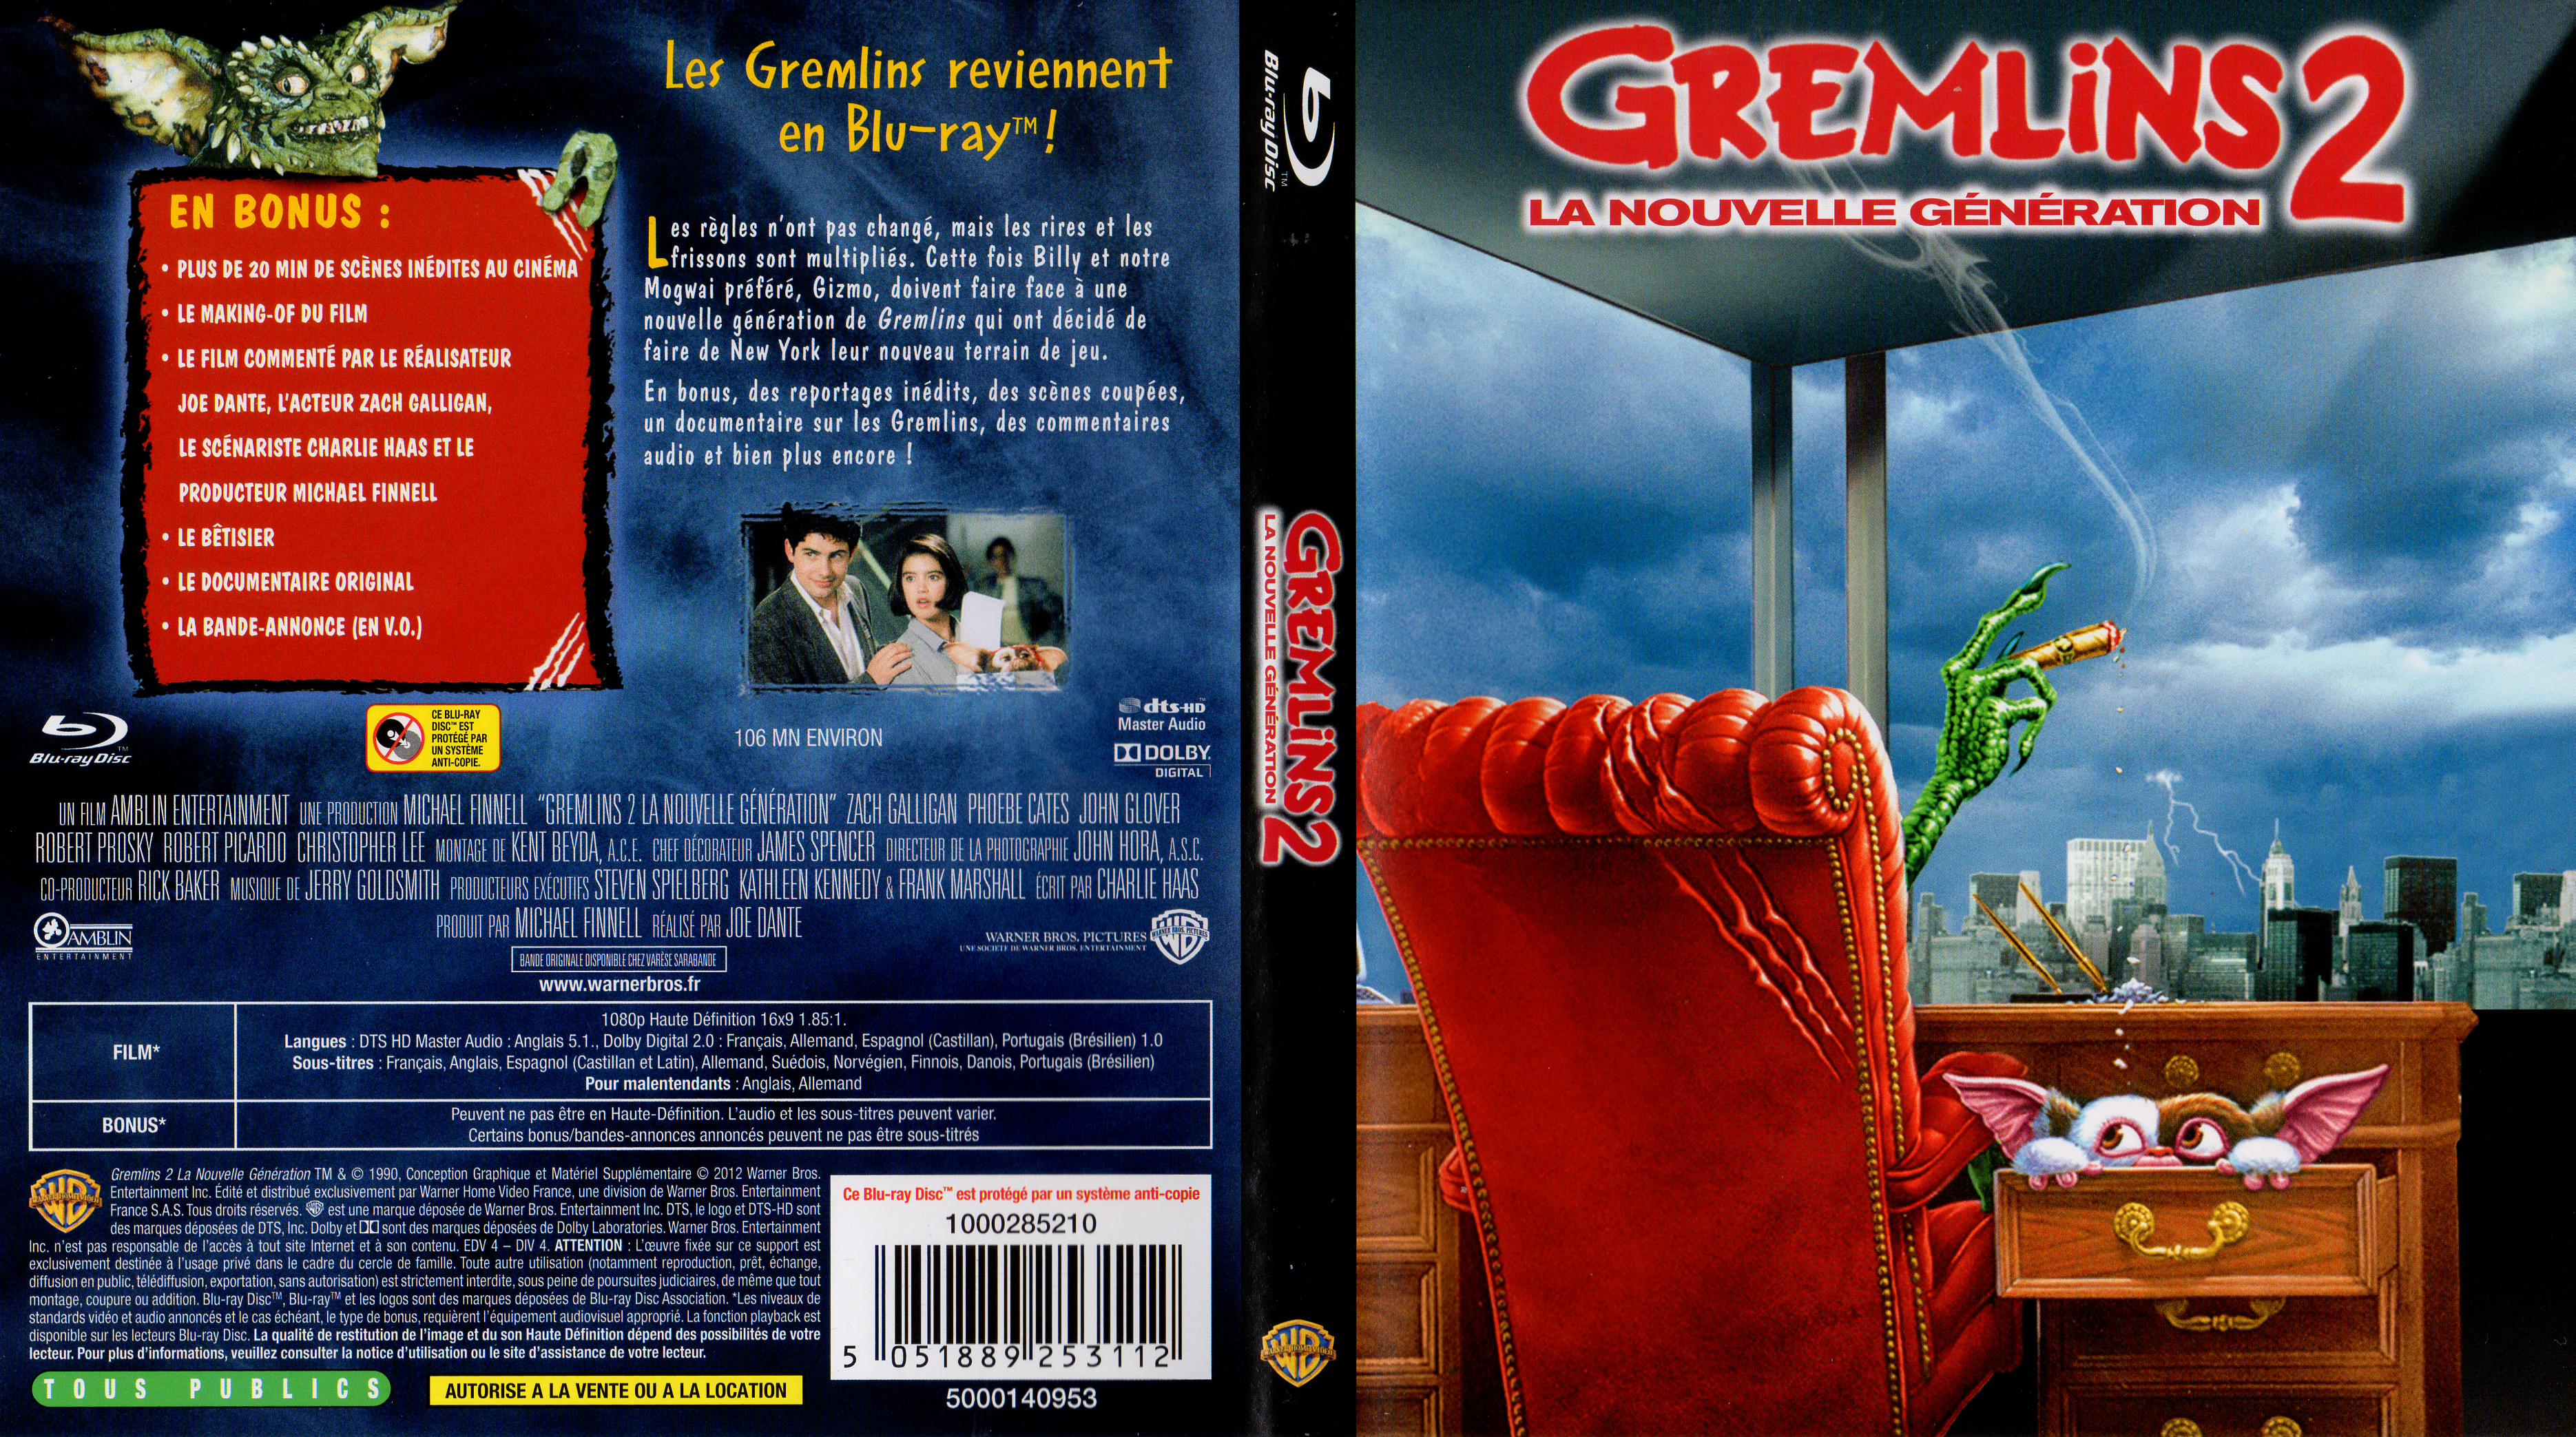 Jaquette DVD Gremlins 2 (BLU-RAY)